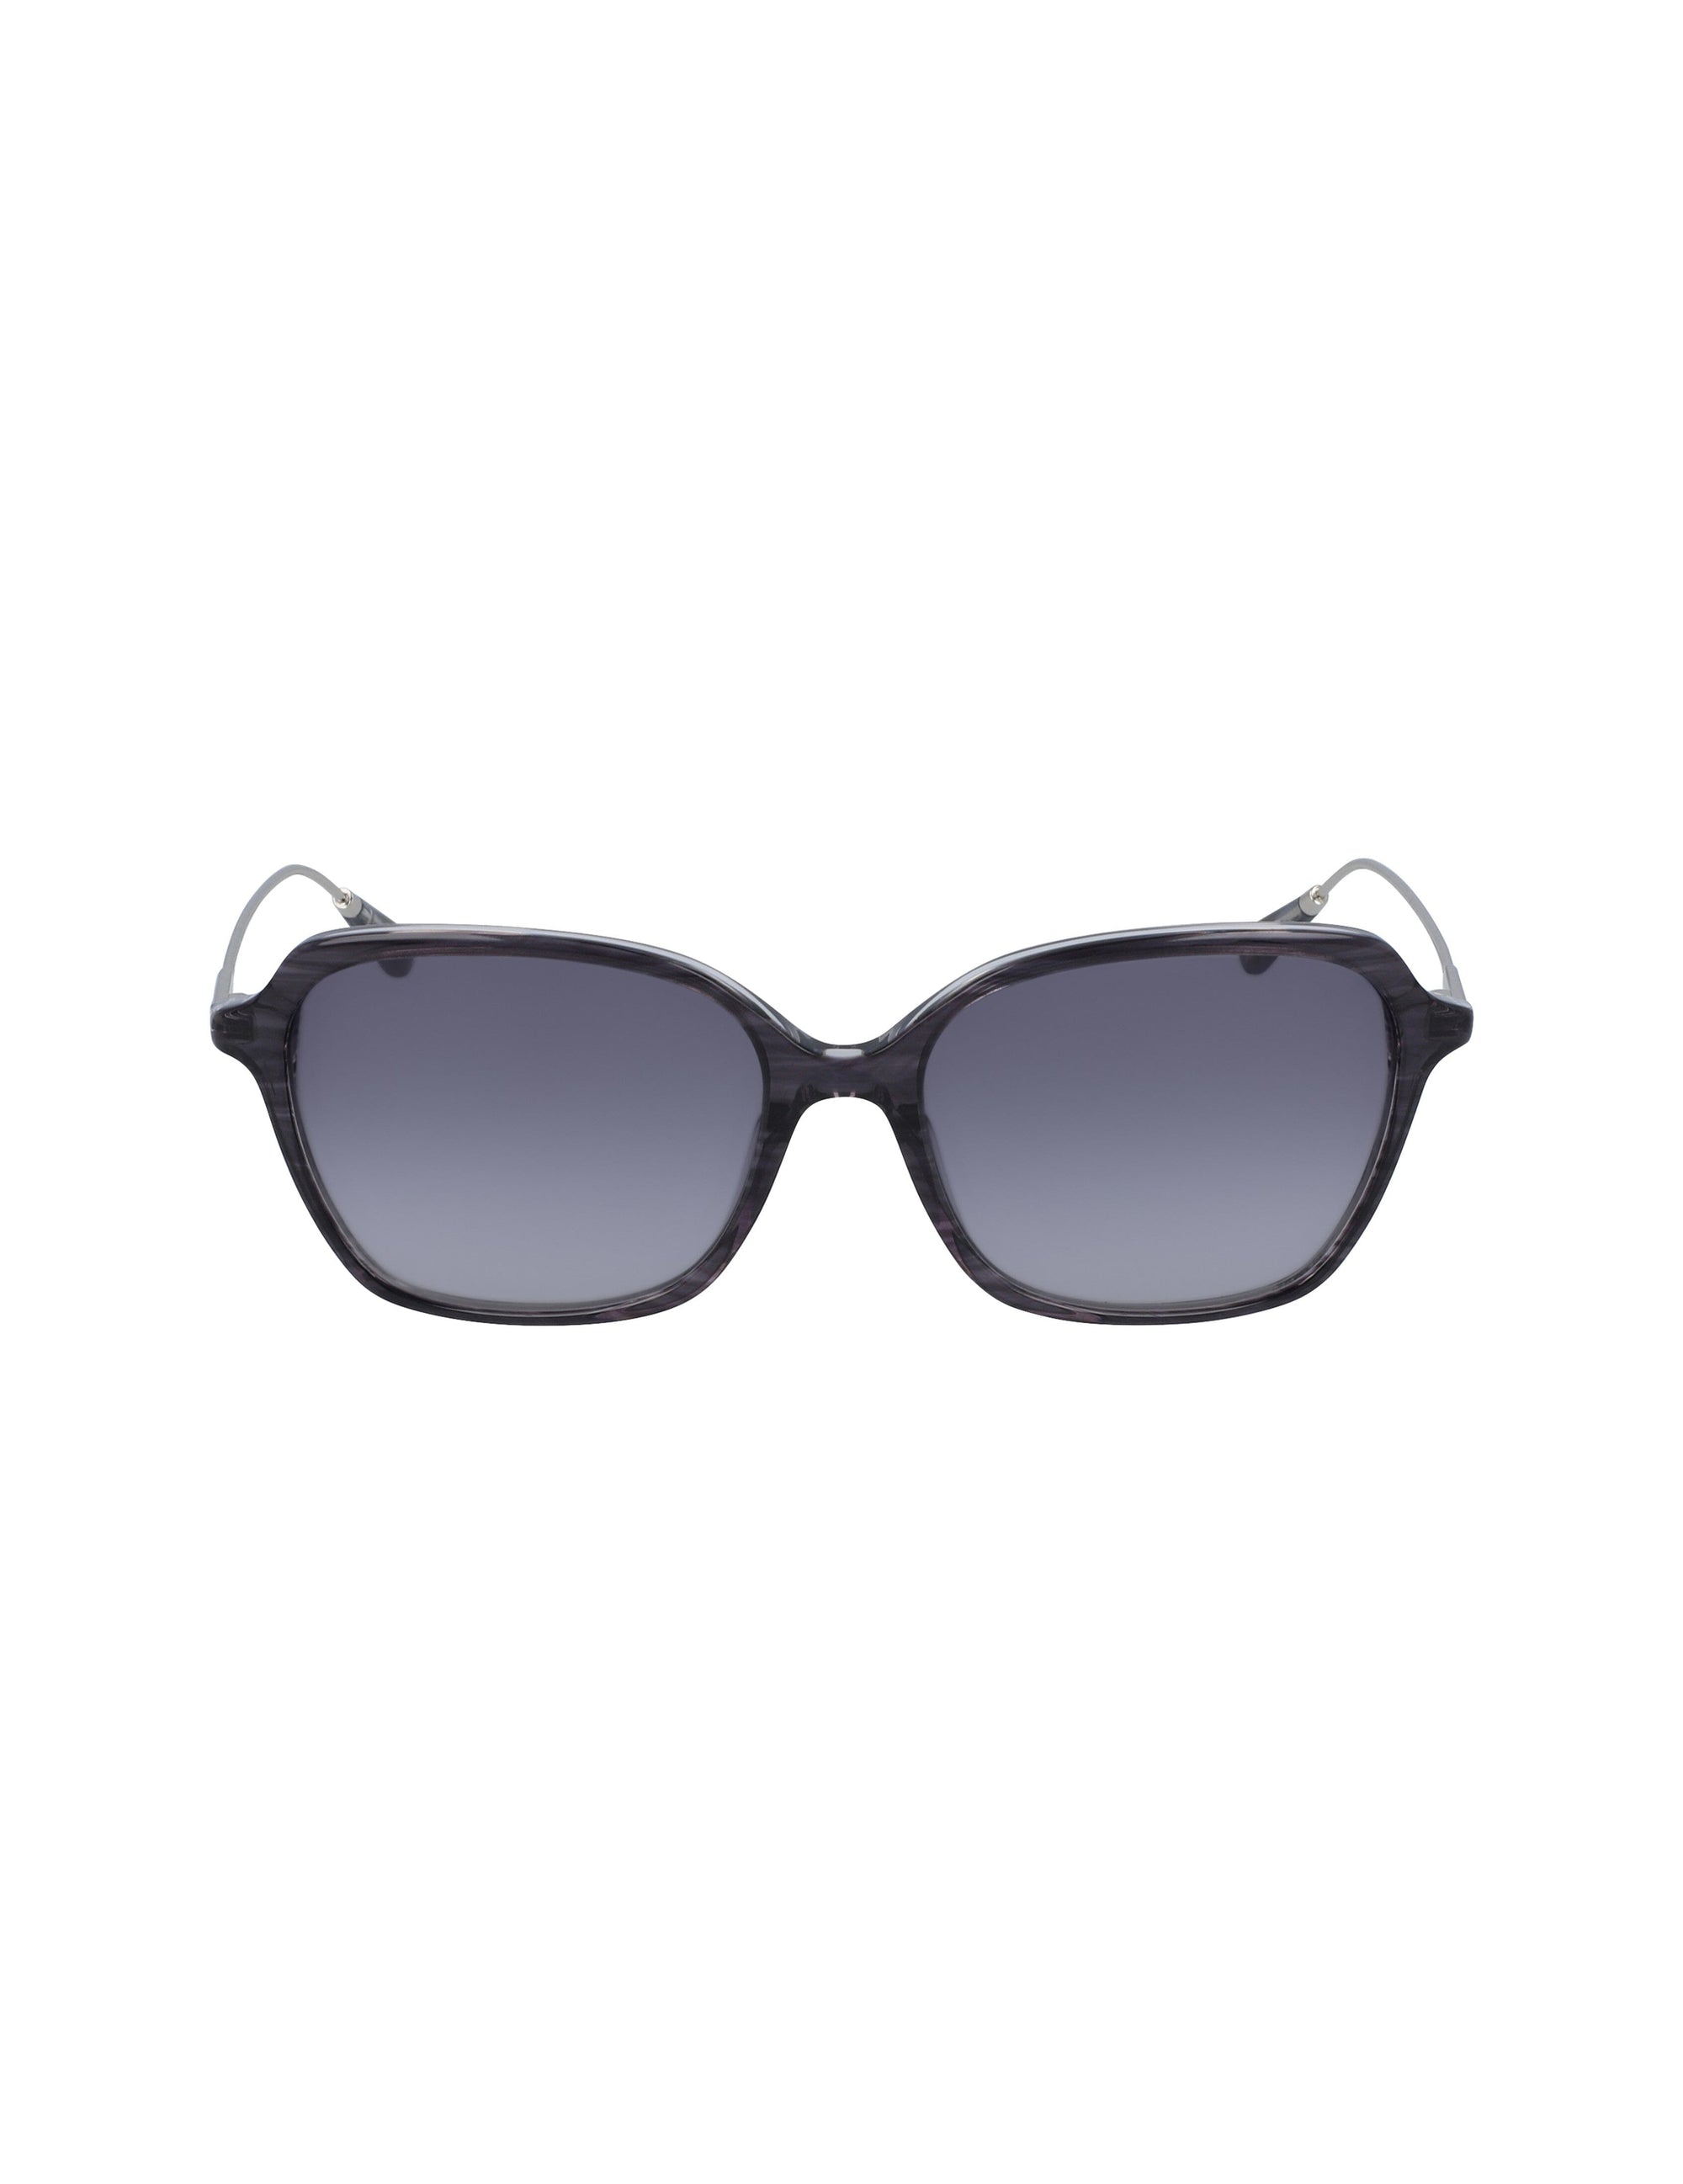 Anne Klein SMOKE Rounded Square Sunglasses